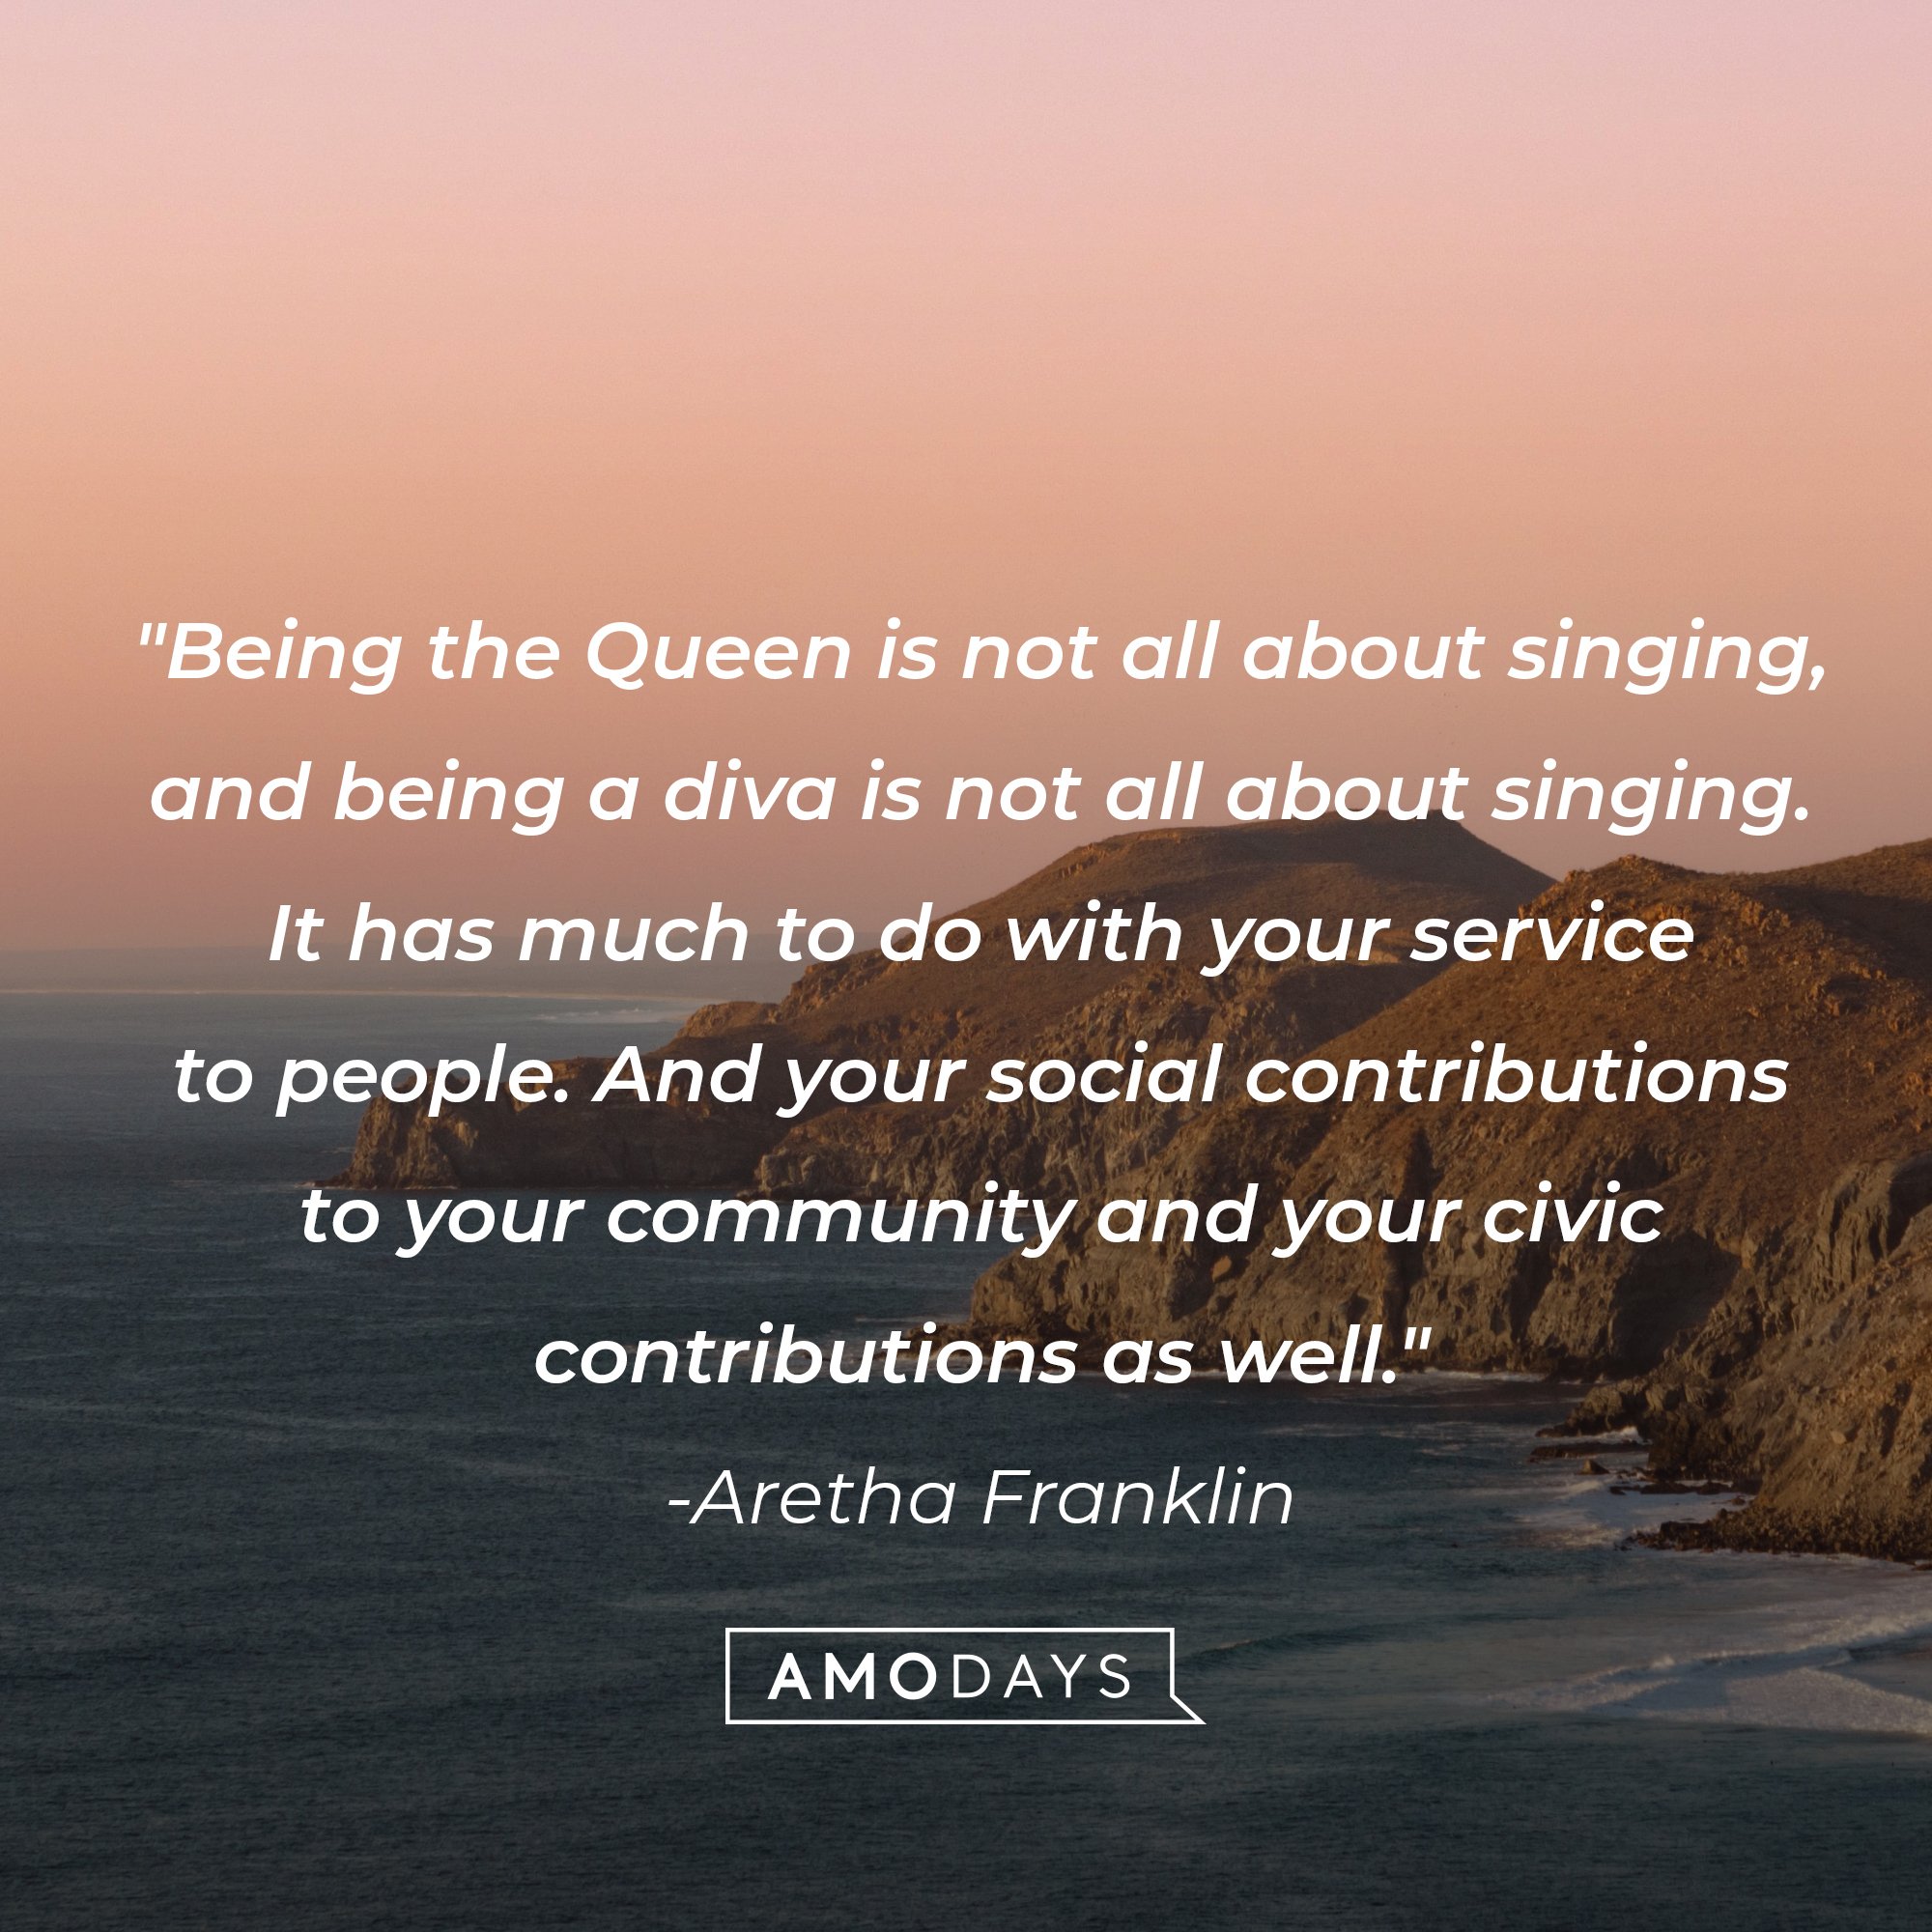 Aretha Franklin’s quote: "Being the Queen is not all about singing, and being a diva is not all about singing. It has much to do with your service to people. And your social contributions to your community and your civic contributions as well."  | Image: AmoDays